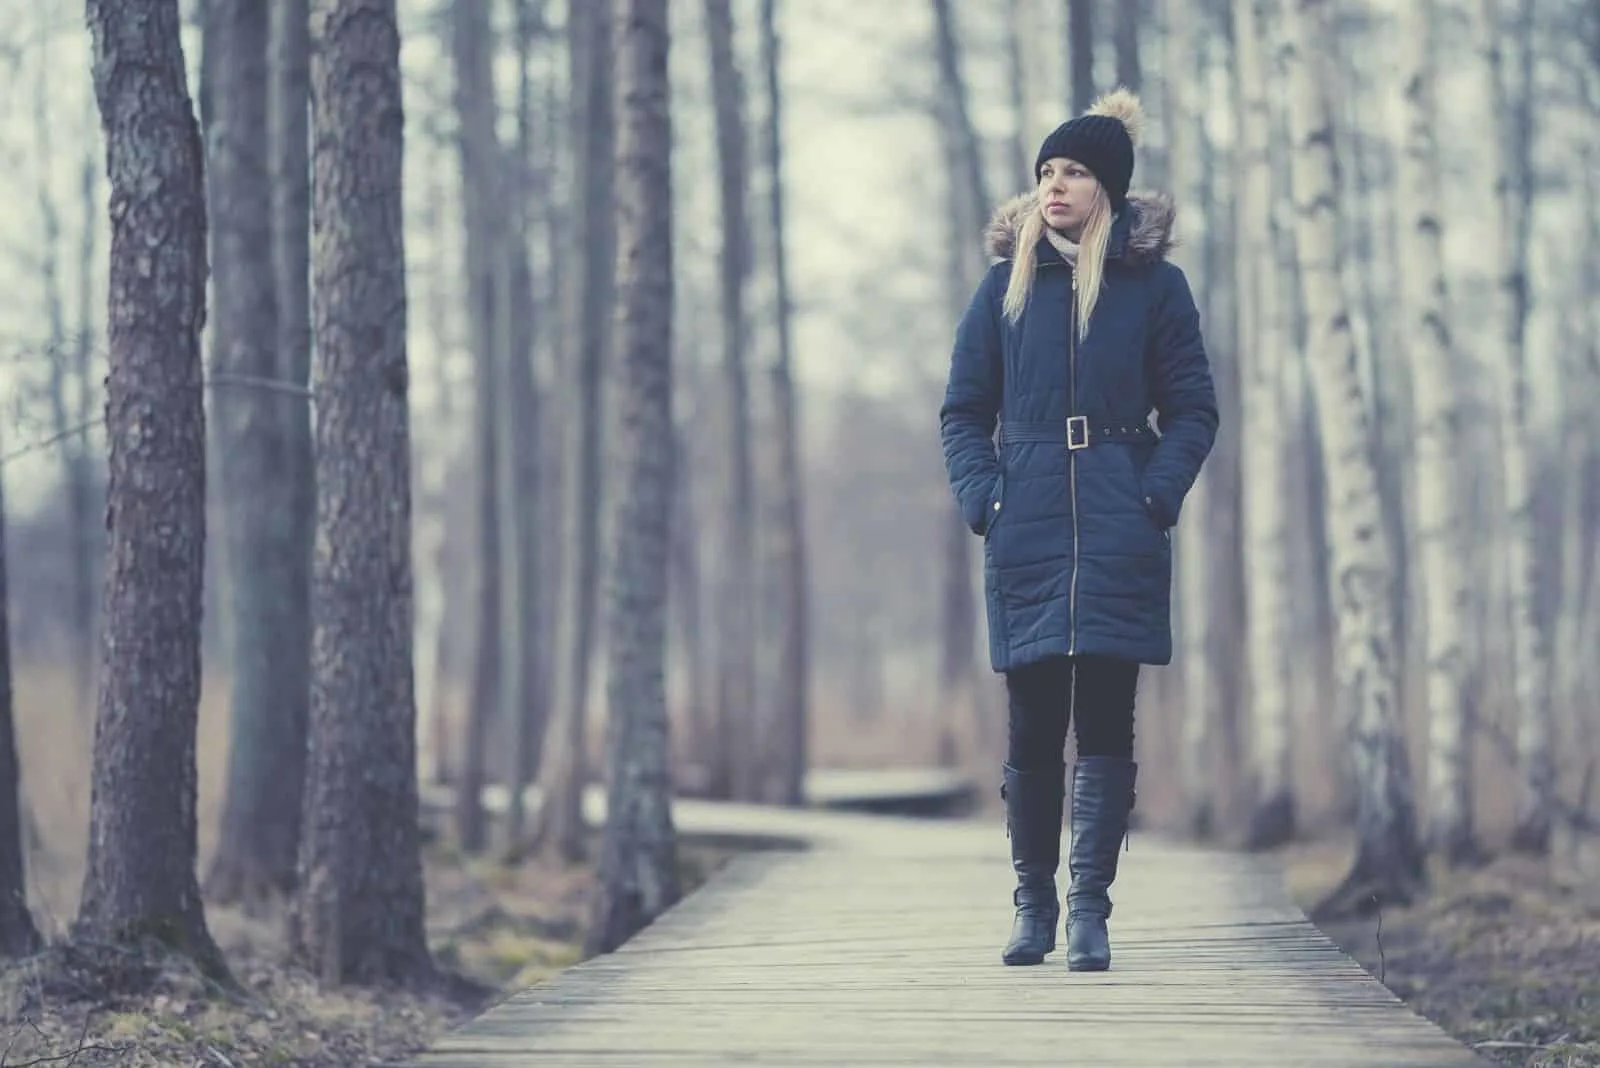 woman in winter clothes walking thru the pathway in the park with tall trees